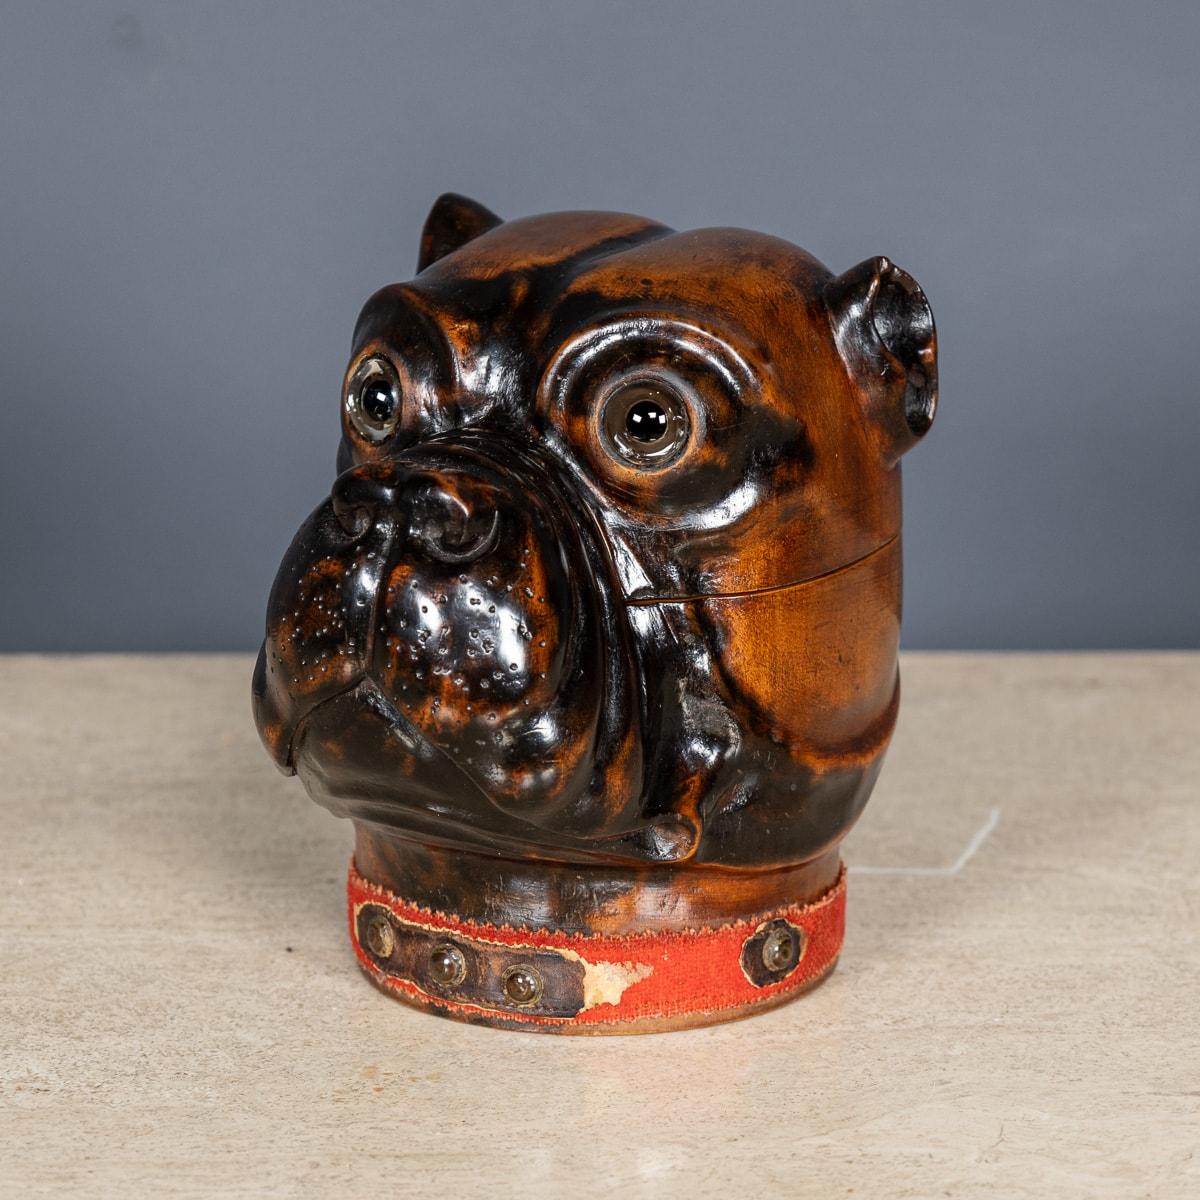 Antique early-20th Century Victorian lignum vitae inkwell carved in the form of a bulldog head. The detail is of exceptional quality, featuring glass eyes and a red felt collar around the base. The inside has a brass lidded inkwell and glass liner.